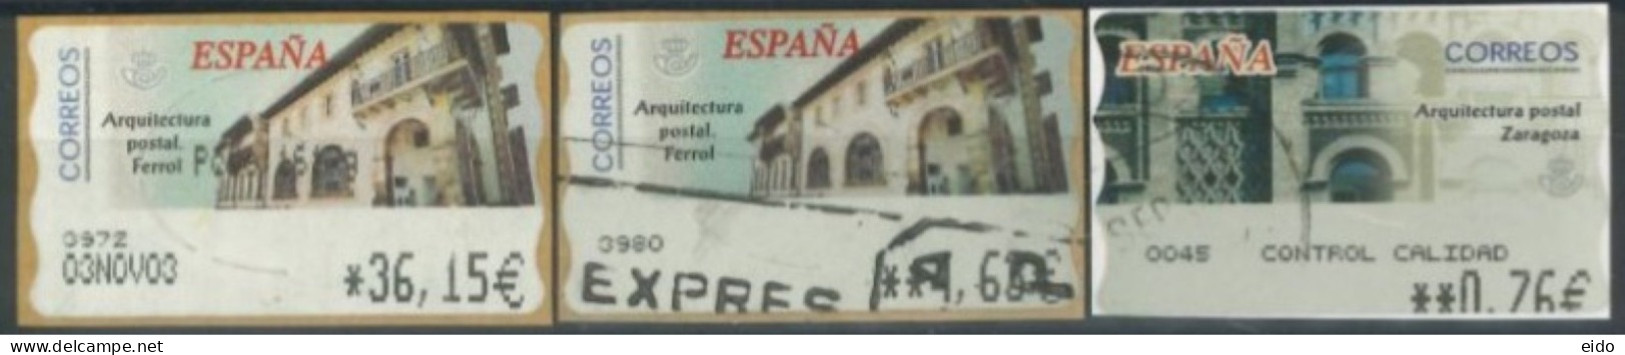 SPAIN - 2003 - POSTAL ARCHITECTURE FERROL & ZARAGOZA STAMPS LABELS SET OF 3 OF DIFFERENT VALUES, USED . - Gebraucht